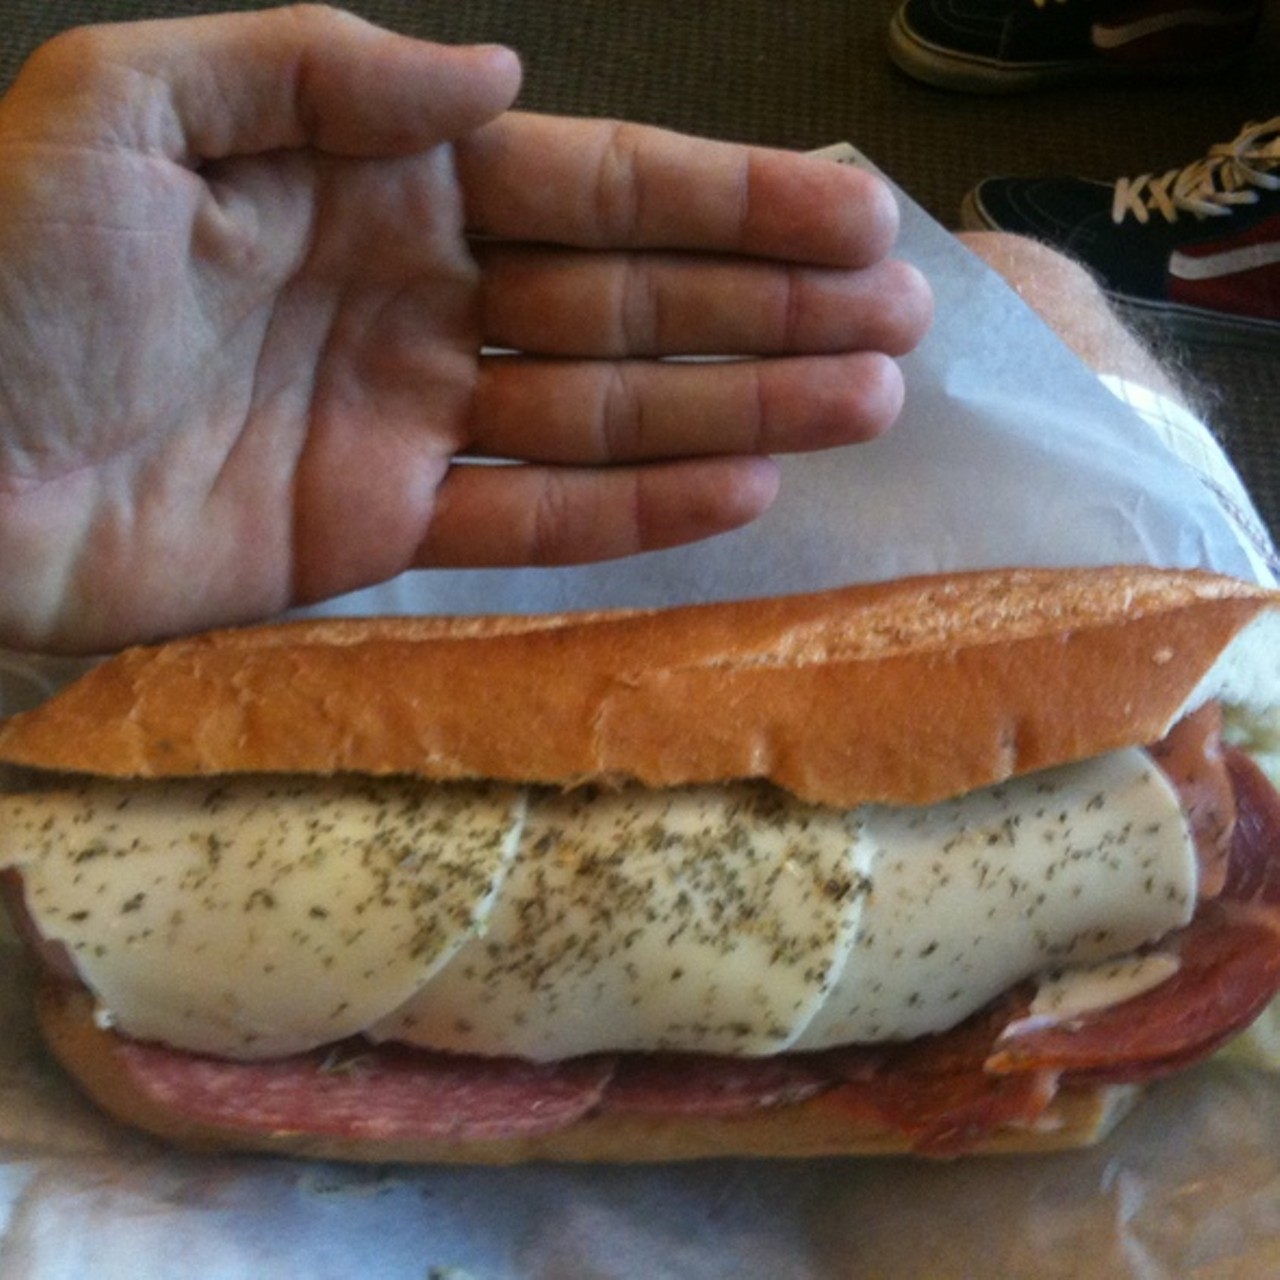 Grum's Sandwich Shoppe is located at 1776 Coventry Road, Cleveland Heights.